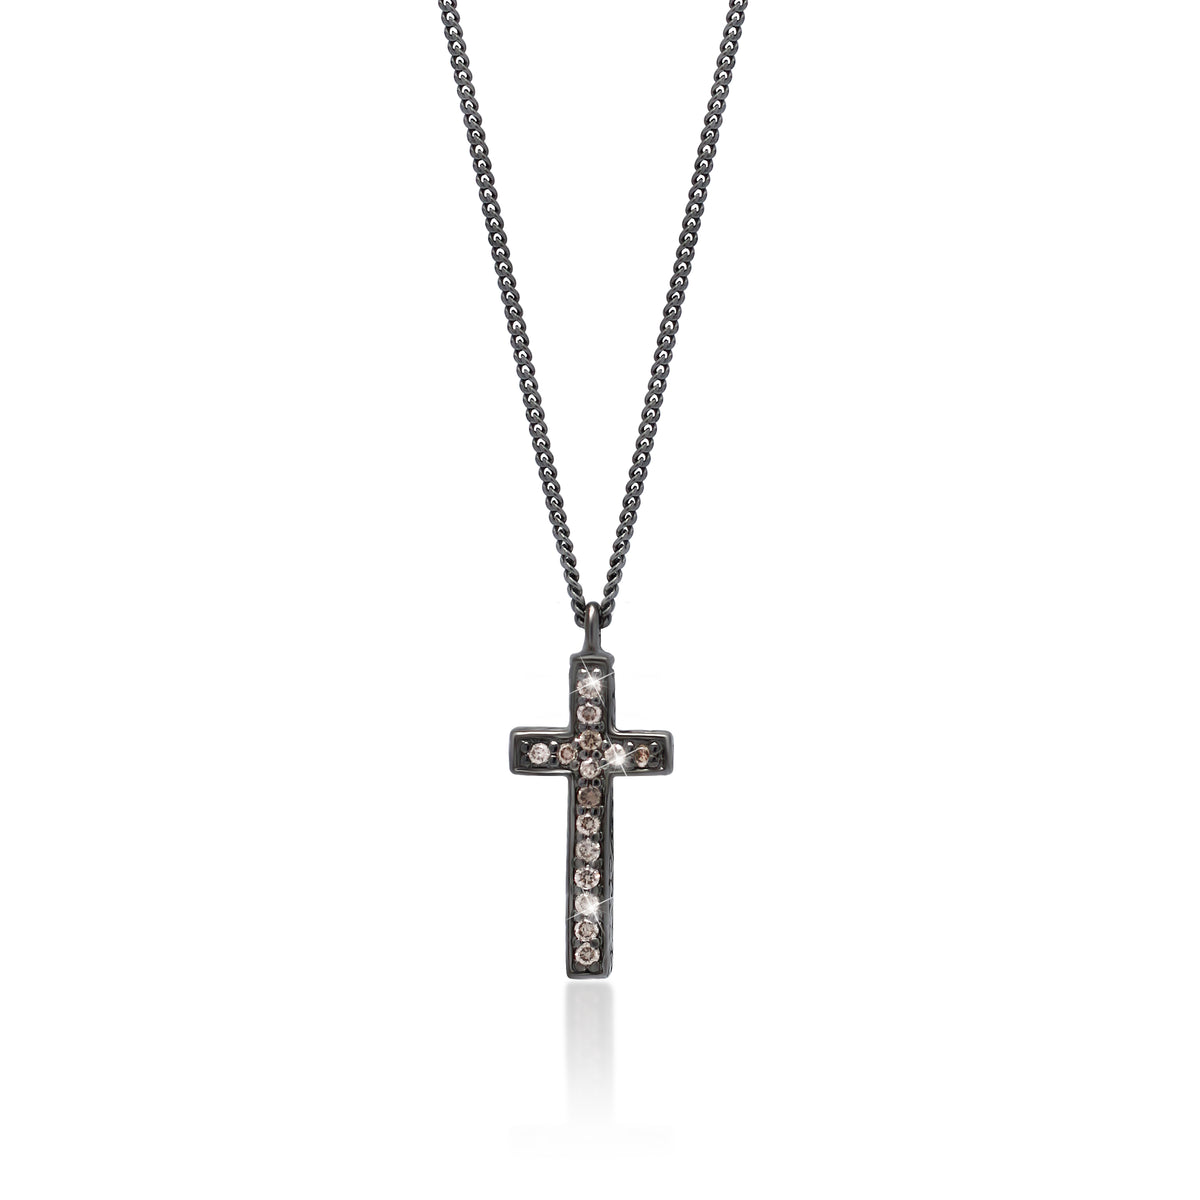 Brown Diamond Cross Pendant Necklace in Black Rhodium Plated Sterling Silver